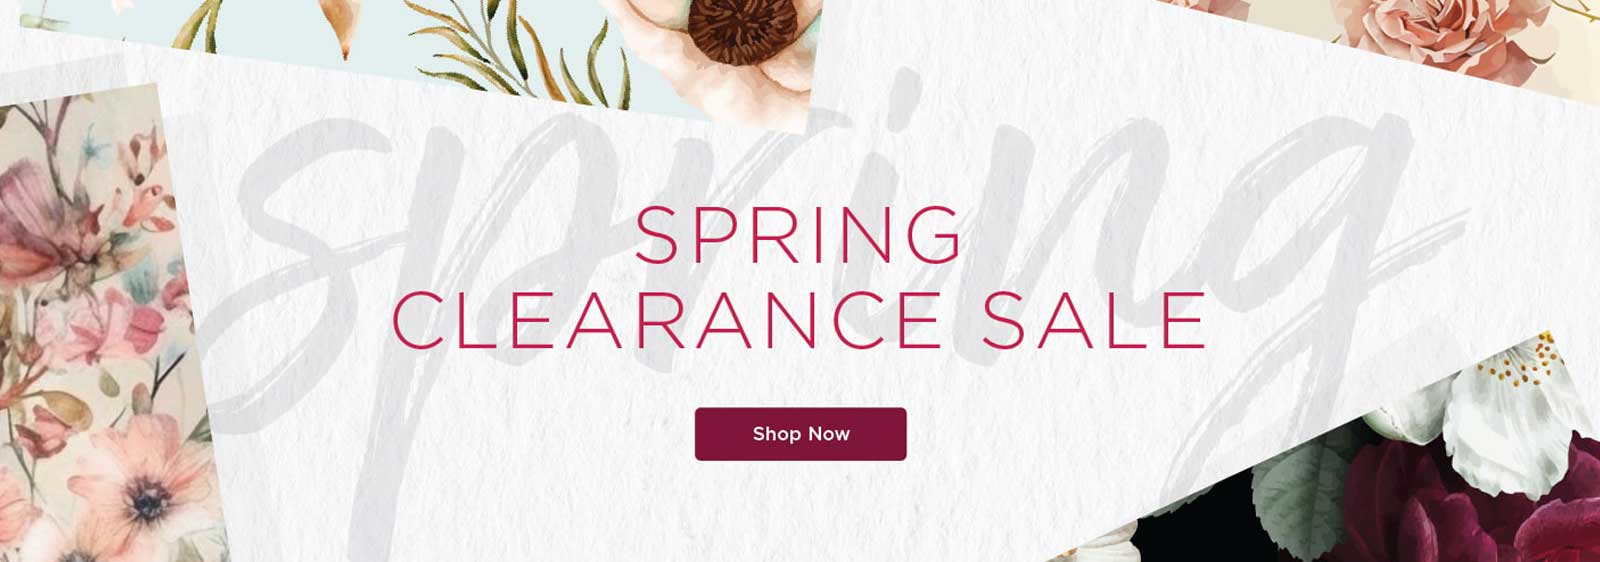 Spring Clearance Sale - Shop Now Through March 29th